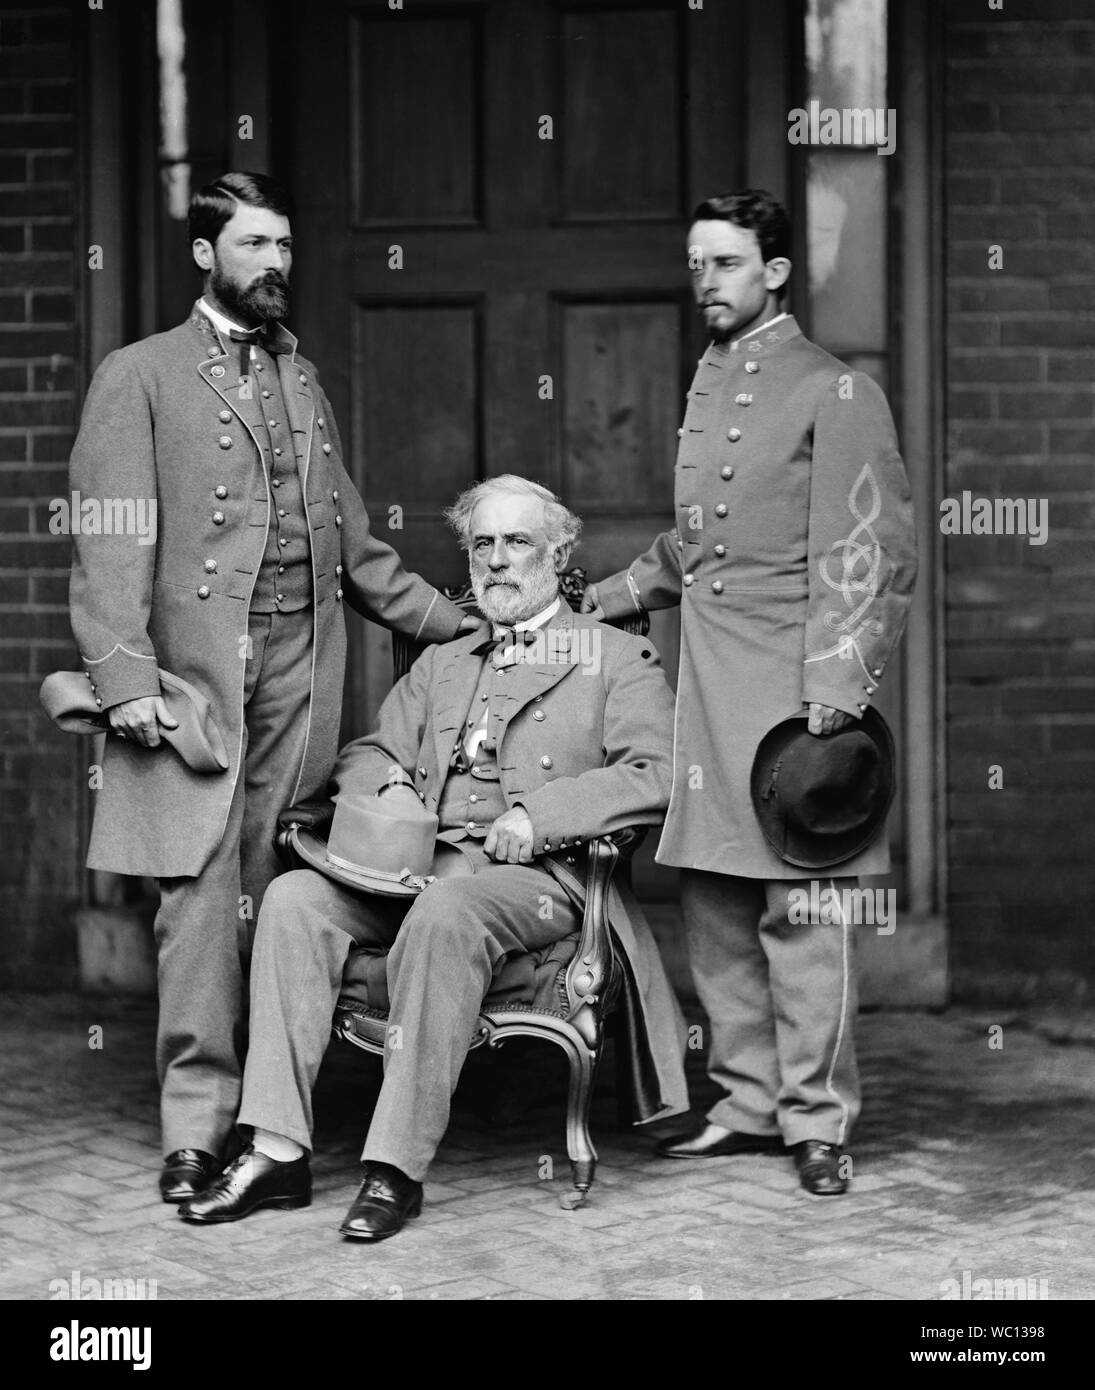 Confederate Generals Curtis Lee, Robert E. Lee and Lieutenant Colonel Walter Taylor, Richmond, Virginia, USA, Photograph by Mathew Brady, 1865 Stock Photo